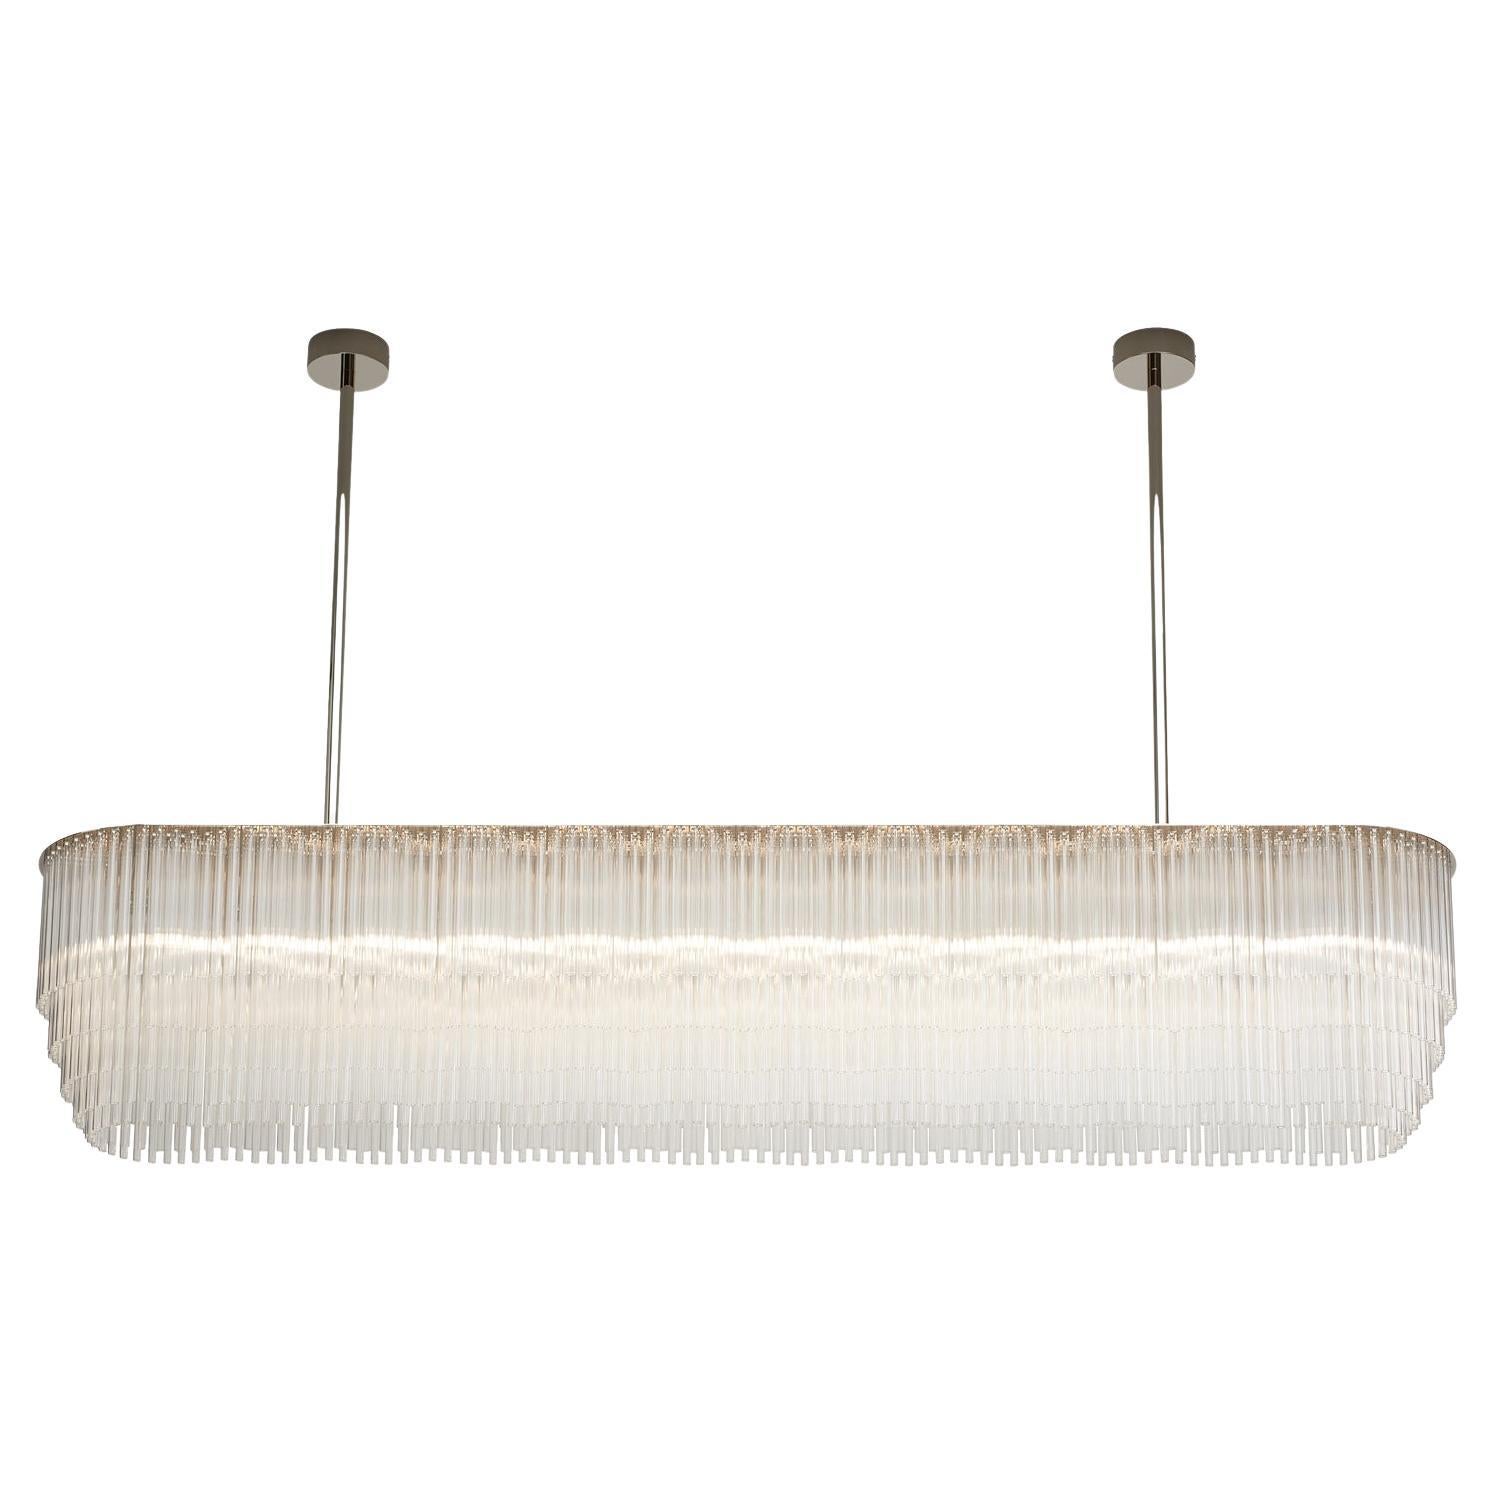 Linear Chandelier 1588mm / 62.5" in Polished Nickel with Tiered Glass Profile For Sale